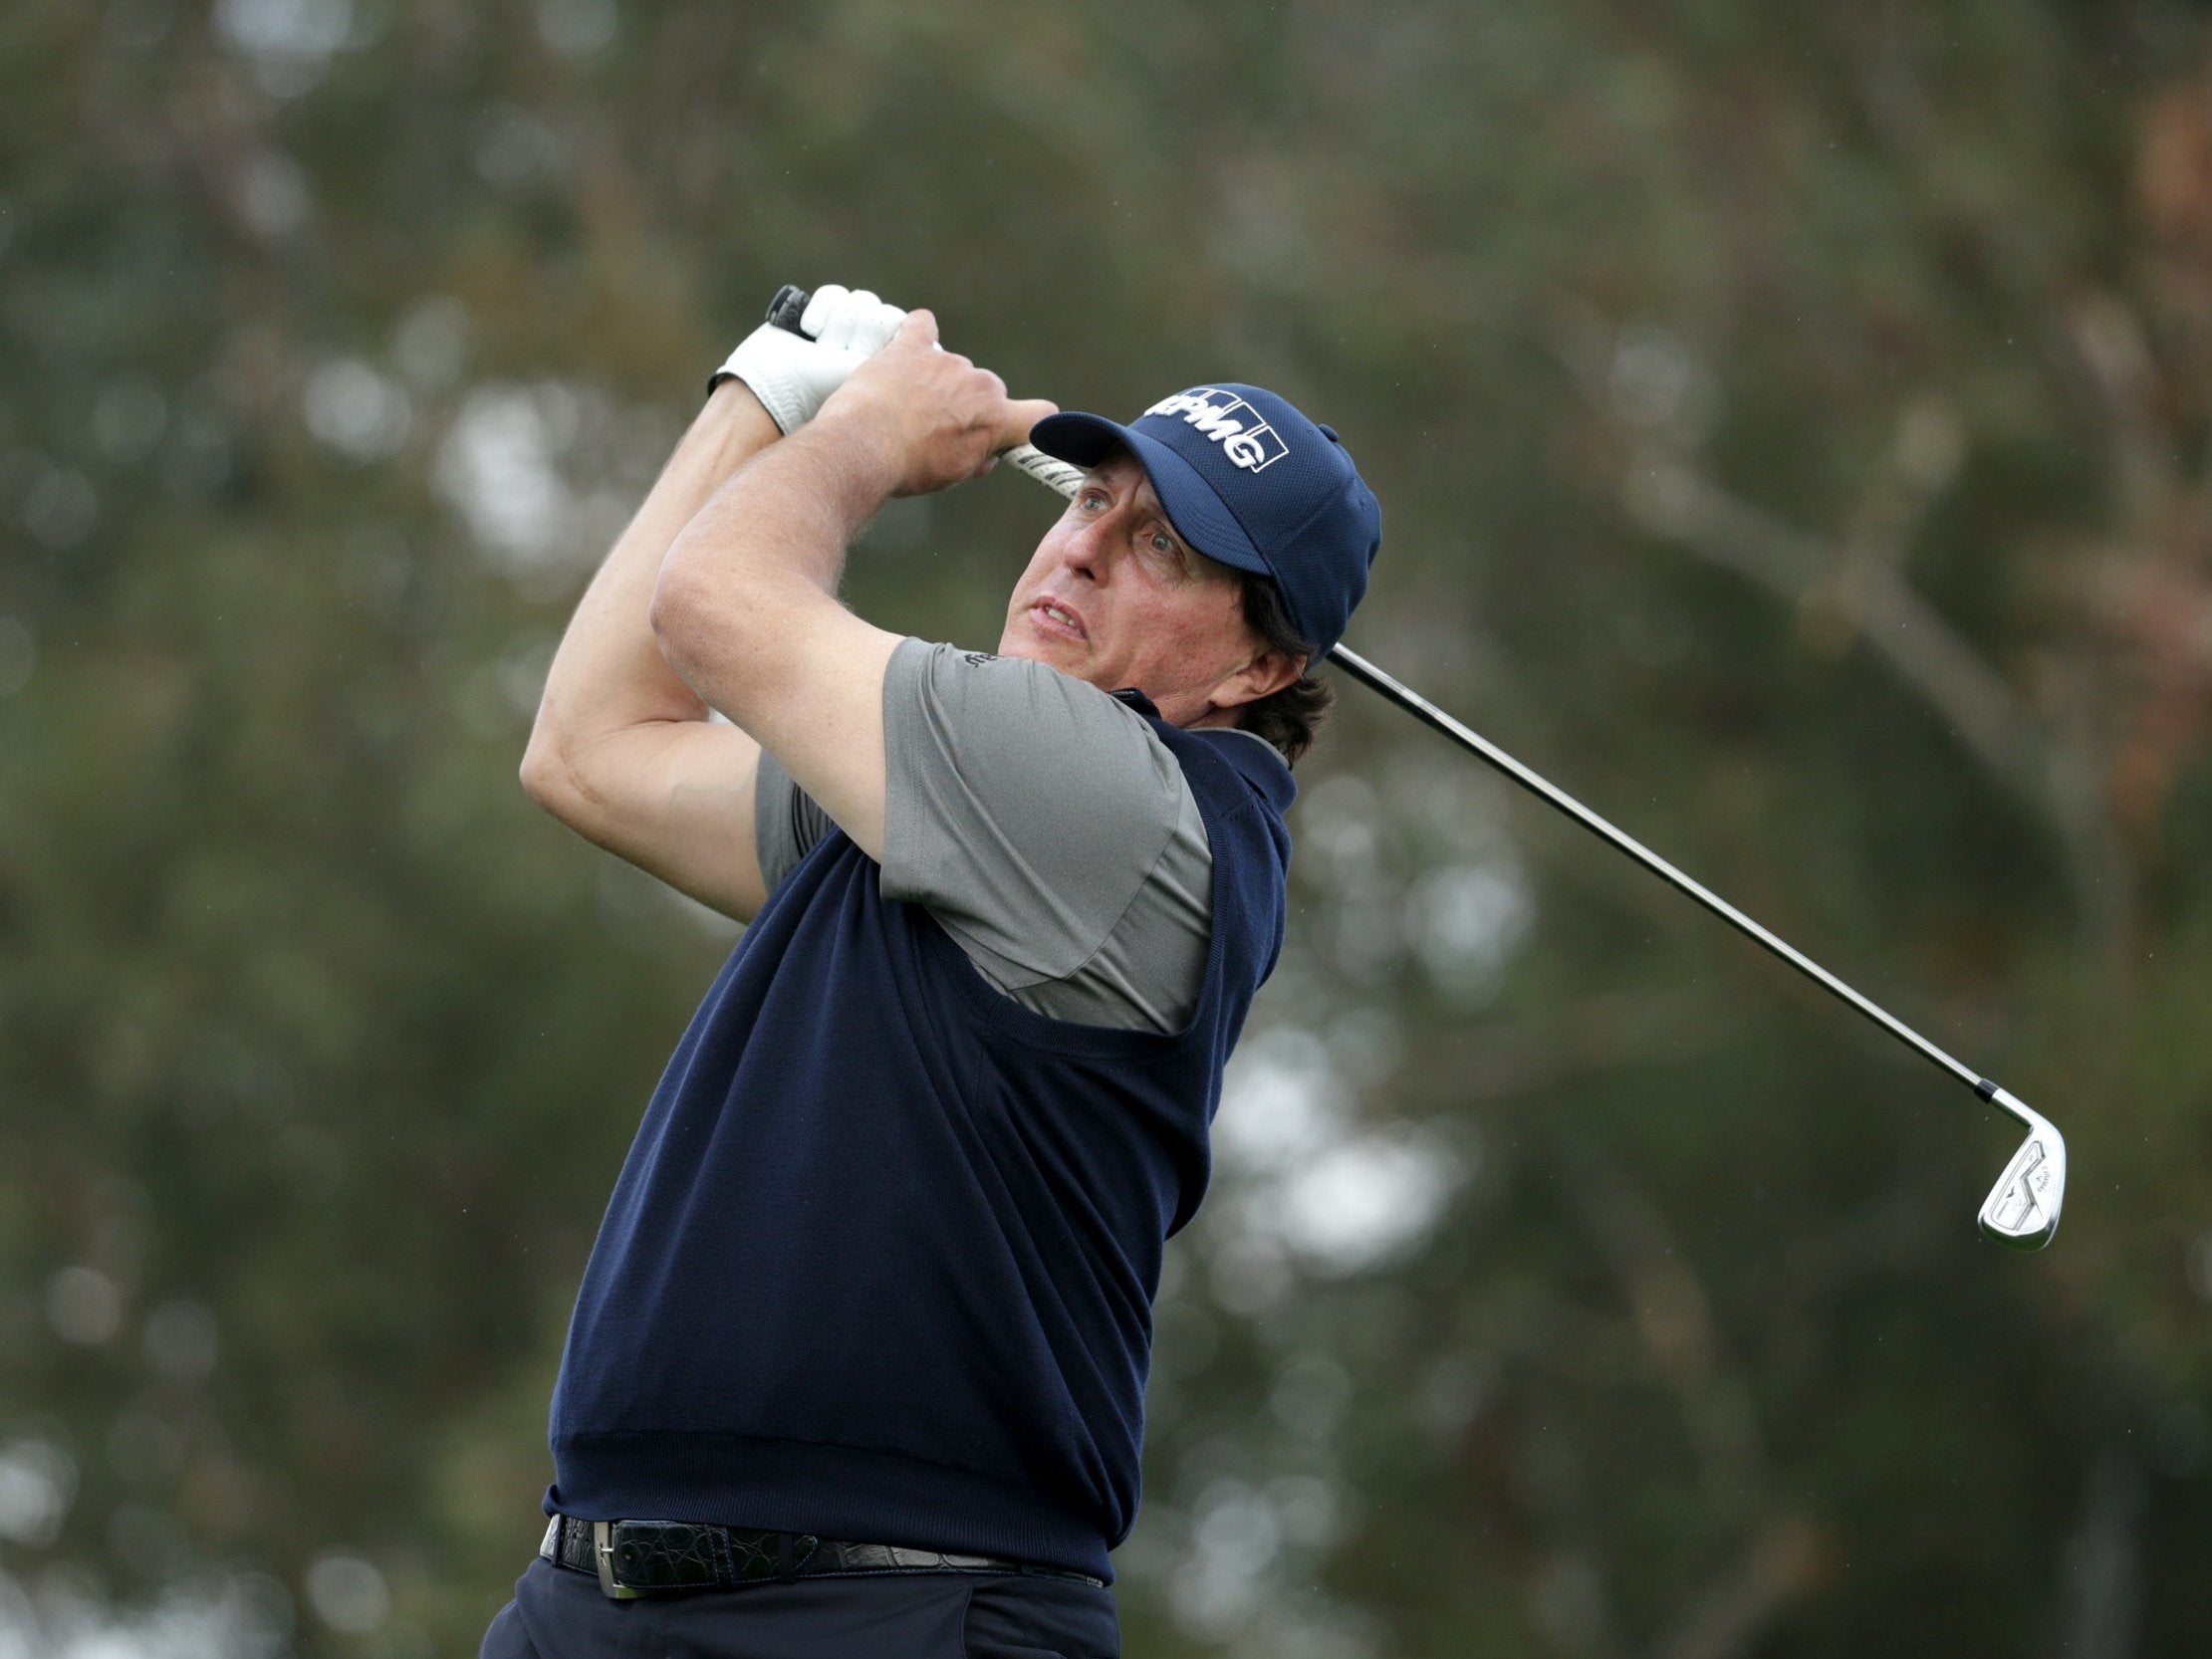 Phil Mickelson leads the Desert Classic by three shots after a career best-equalling 60